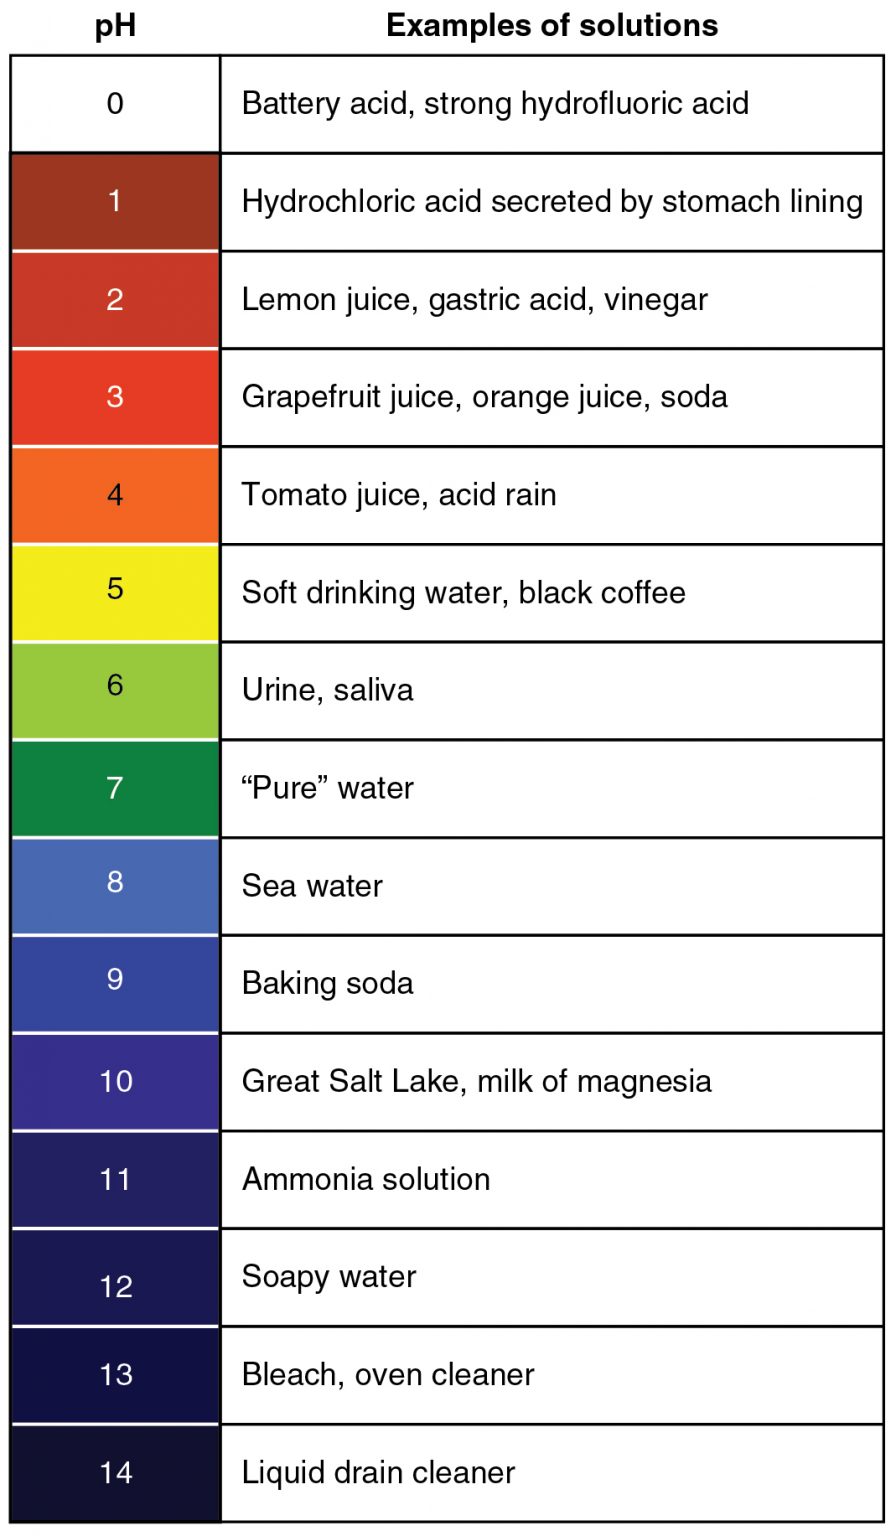 Ph-scale-with-examples-896x1536.jpg